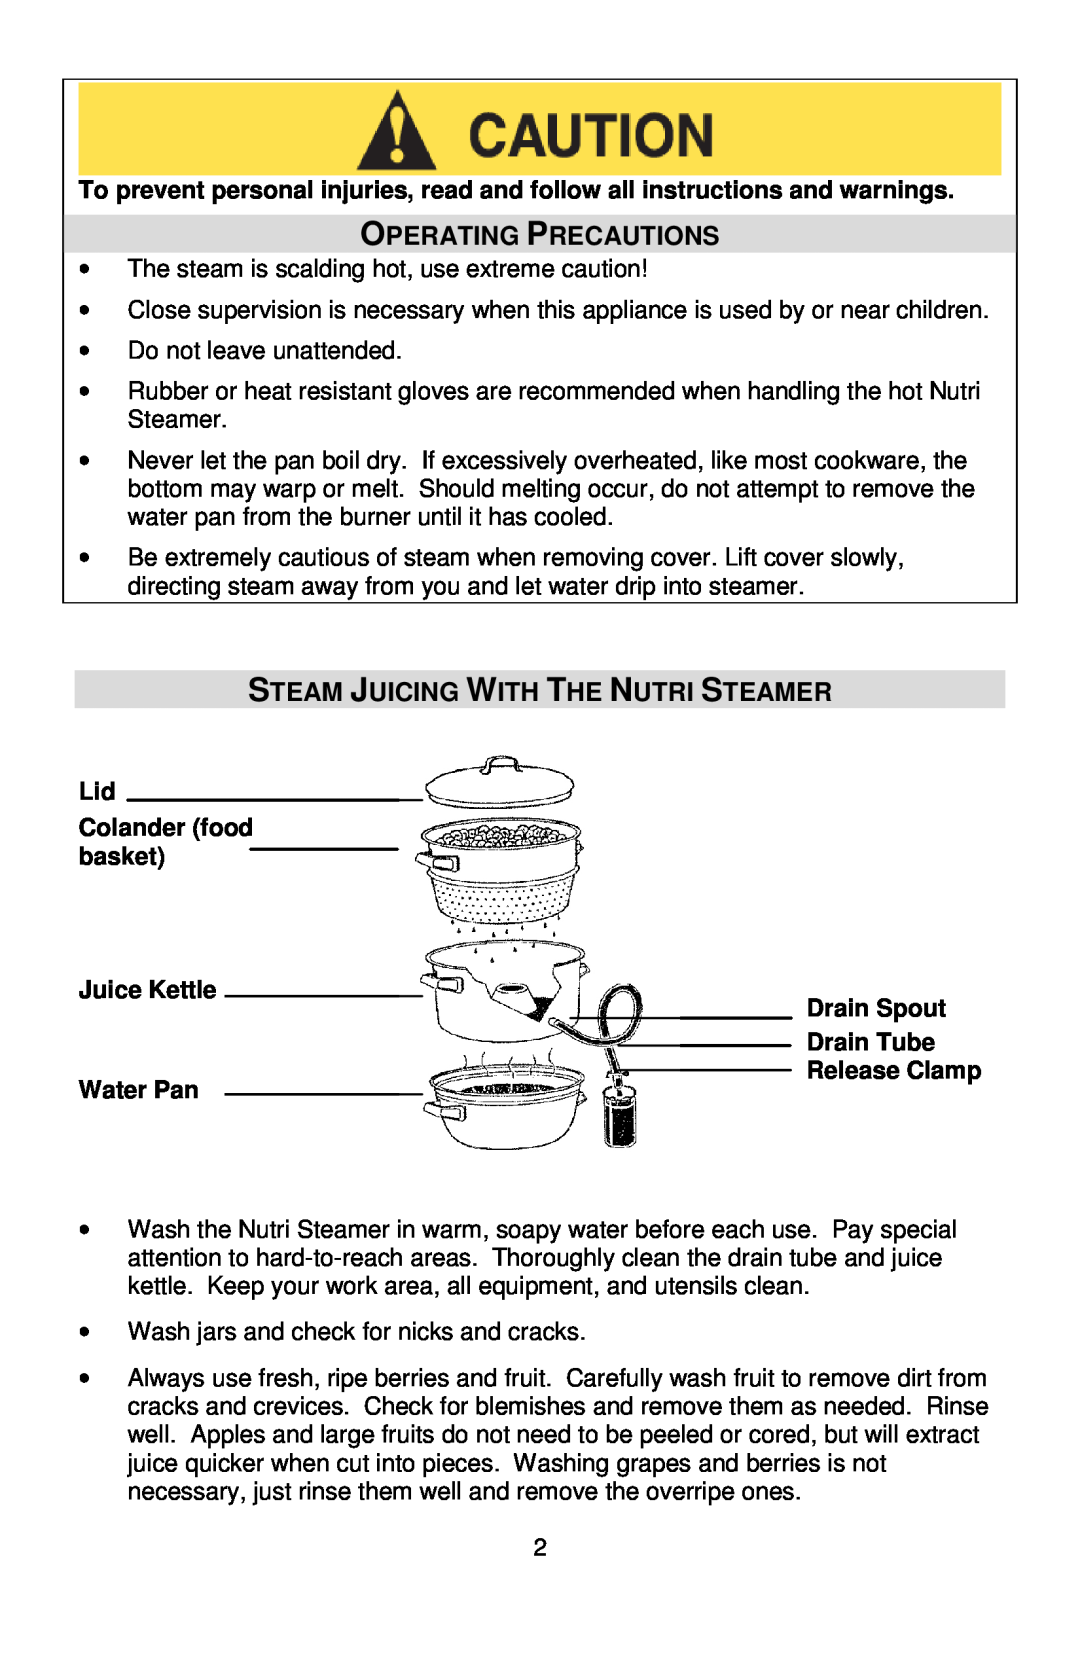 West Bend Back to Basics L5725A 01/09 Operating Precautions, Steam Juicing With The Nutri Steamer, Water Pan 